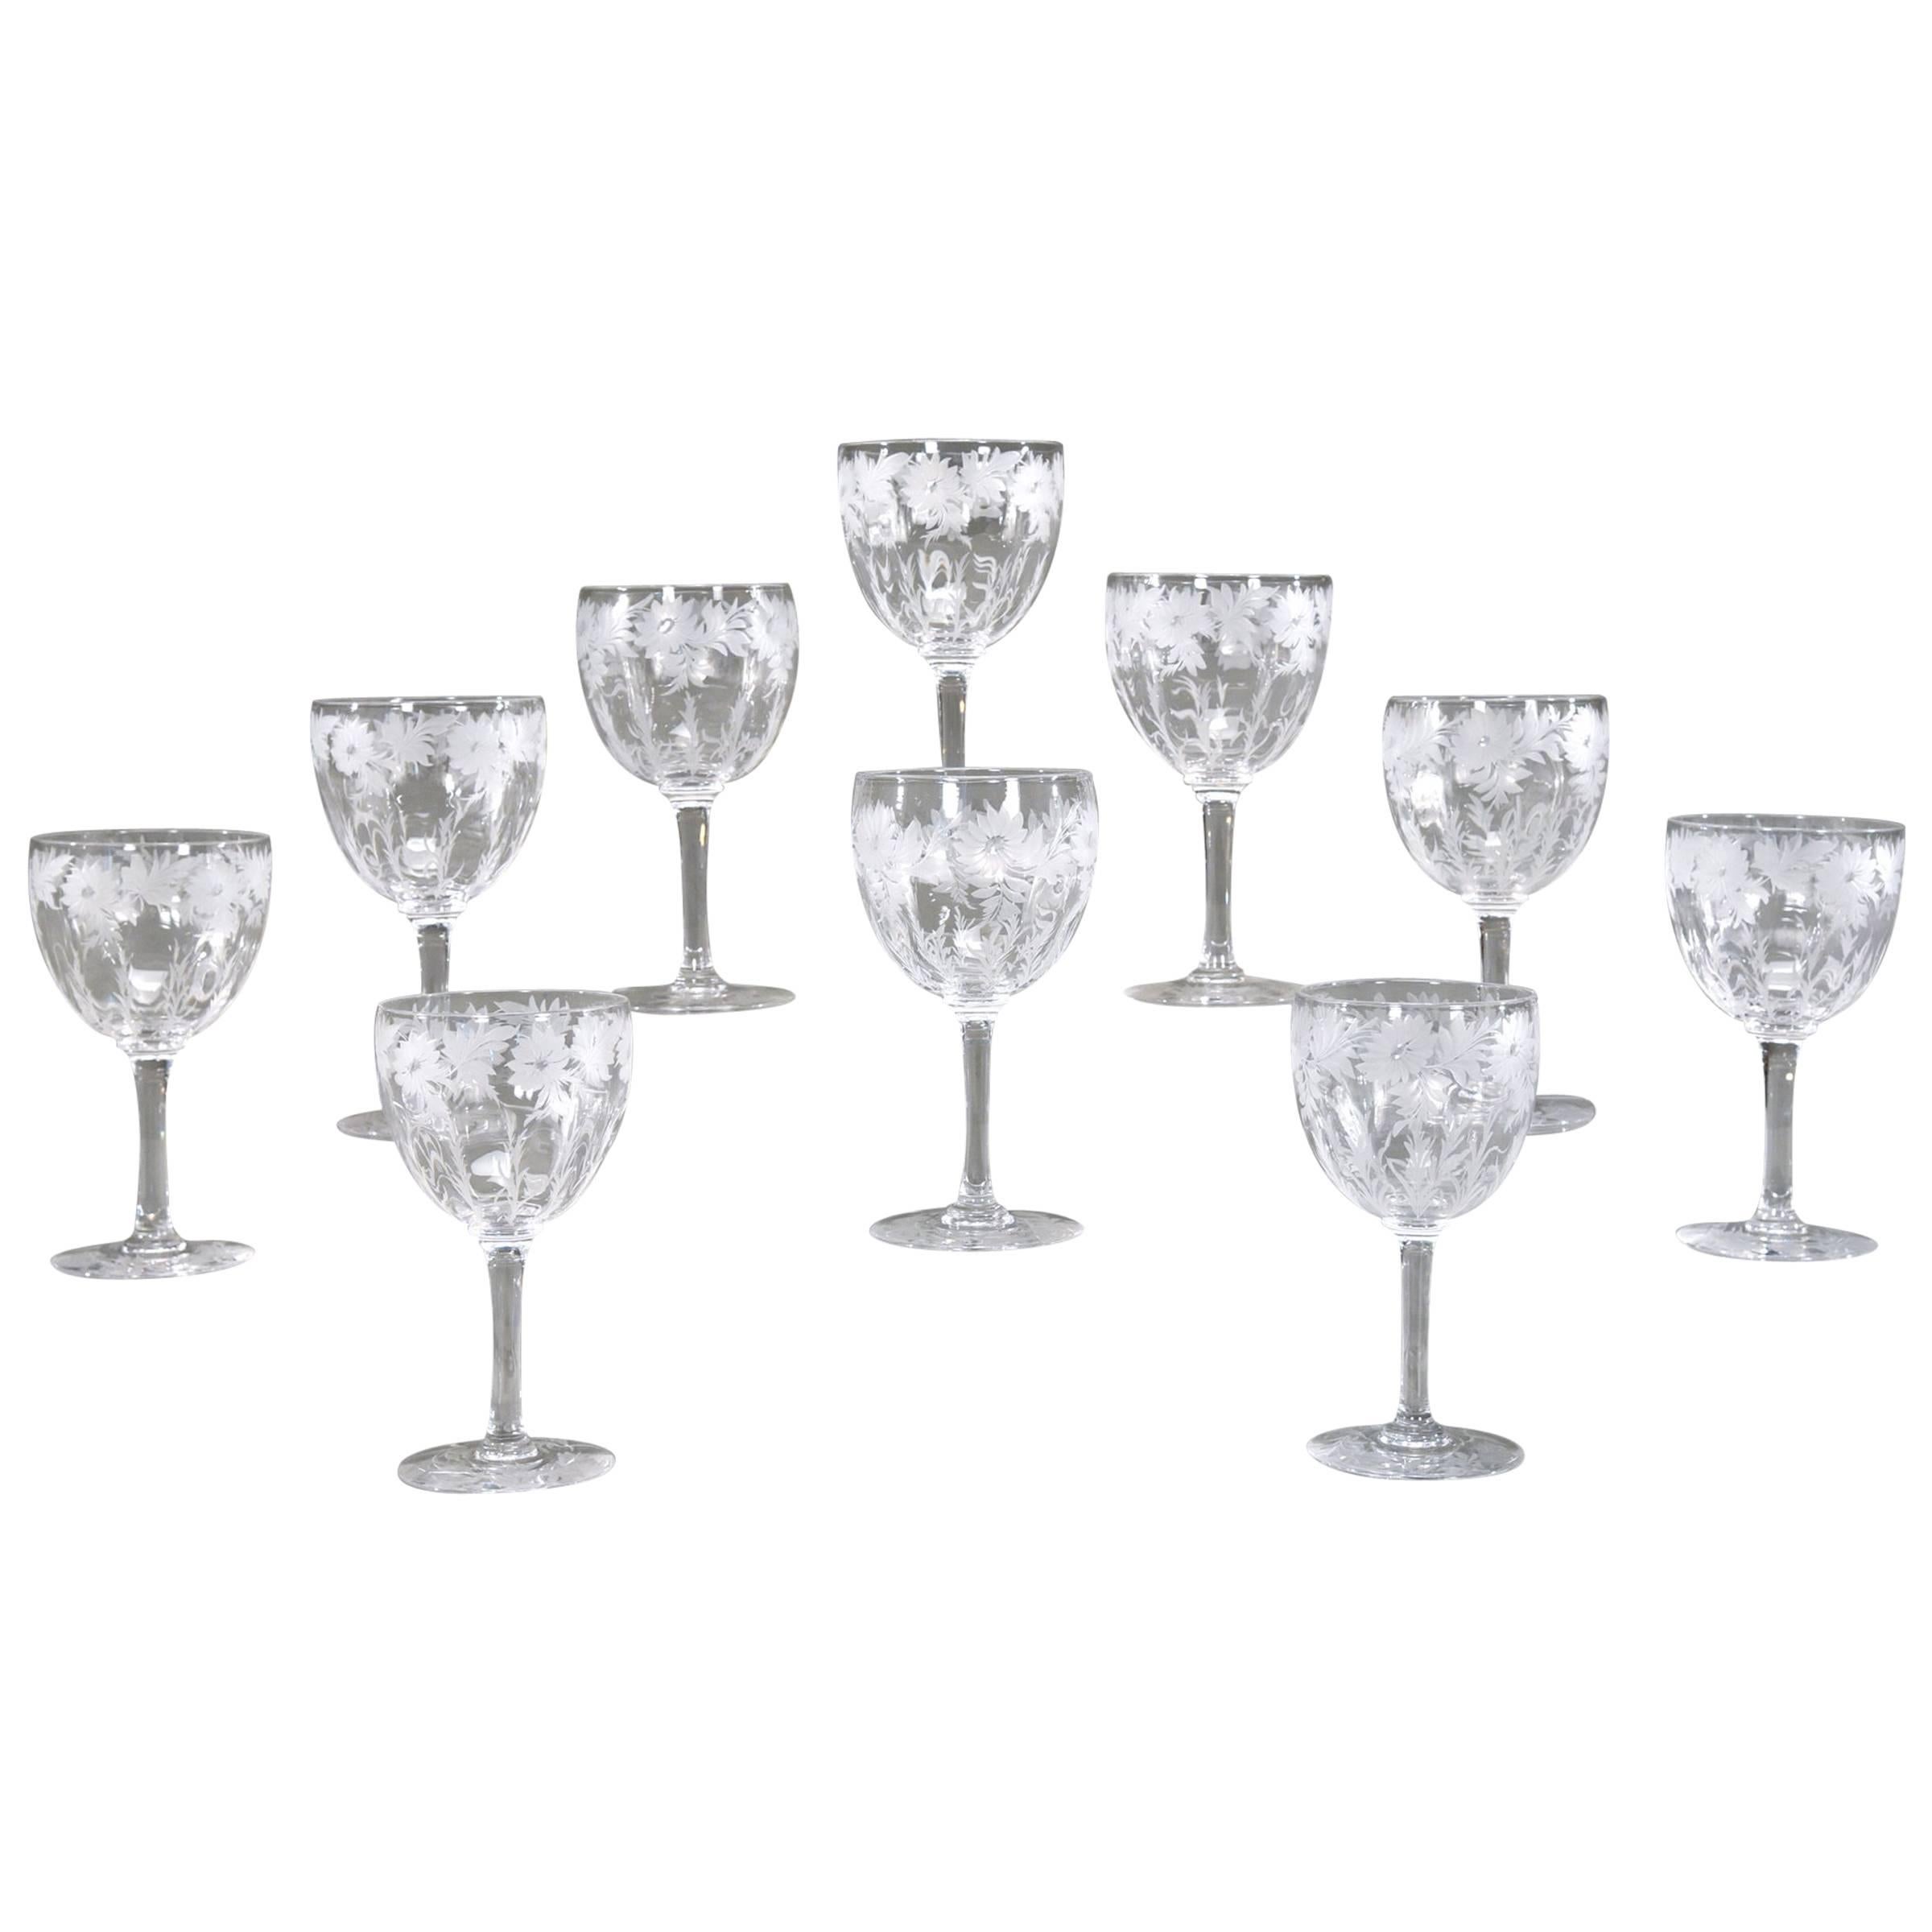 12 Hand Blown Signed Libbey Wheel Cut Crystal Goblets Arts & Crafts Floral Motif